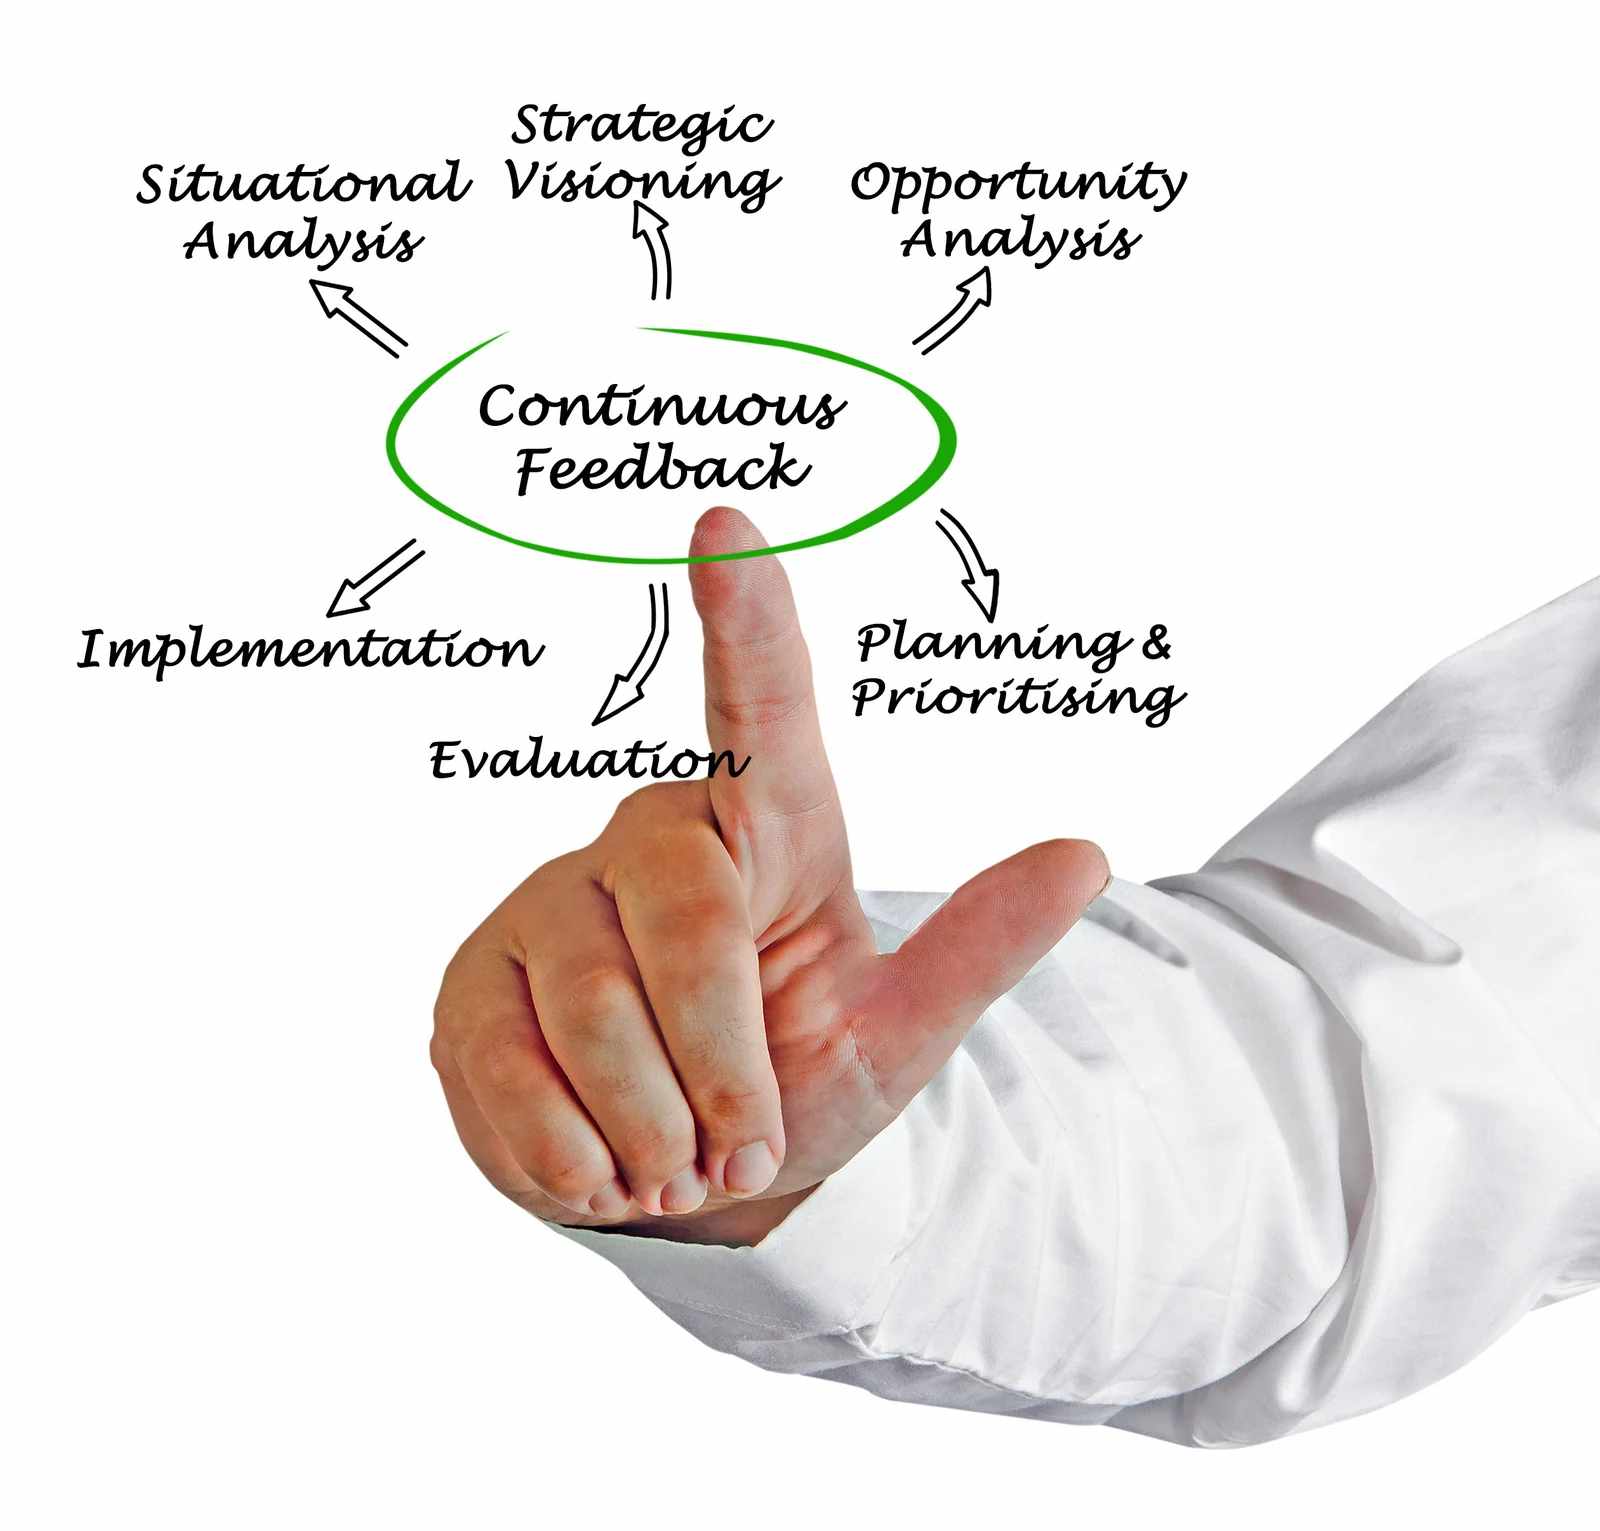 Customer Feedback Loop: What Is It And How To Close It – Lumoa